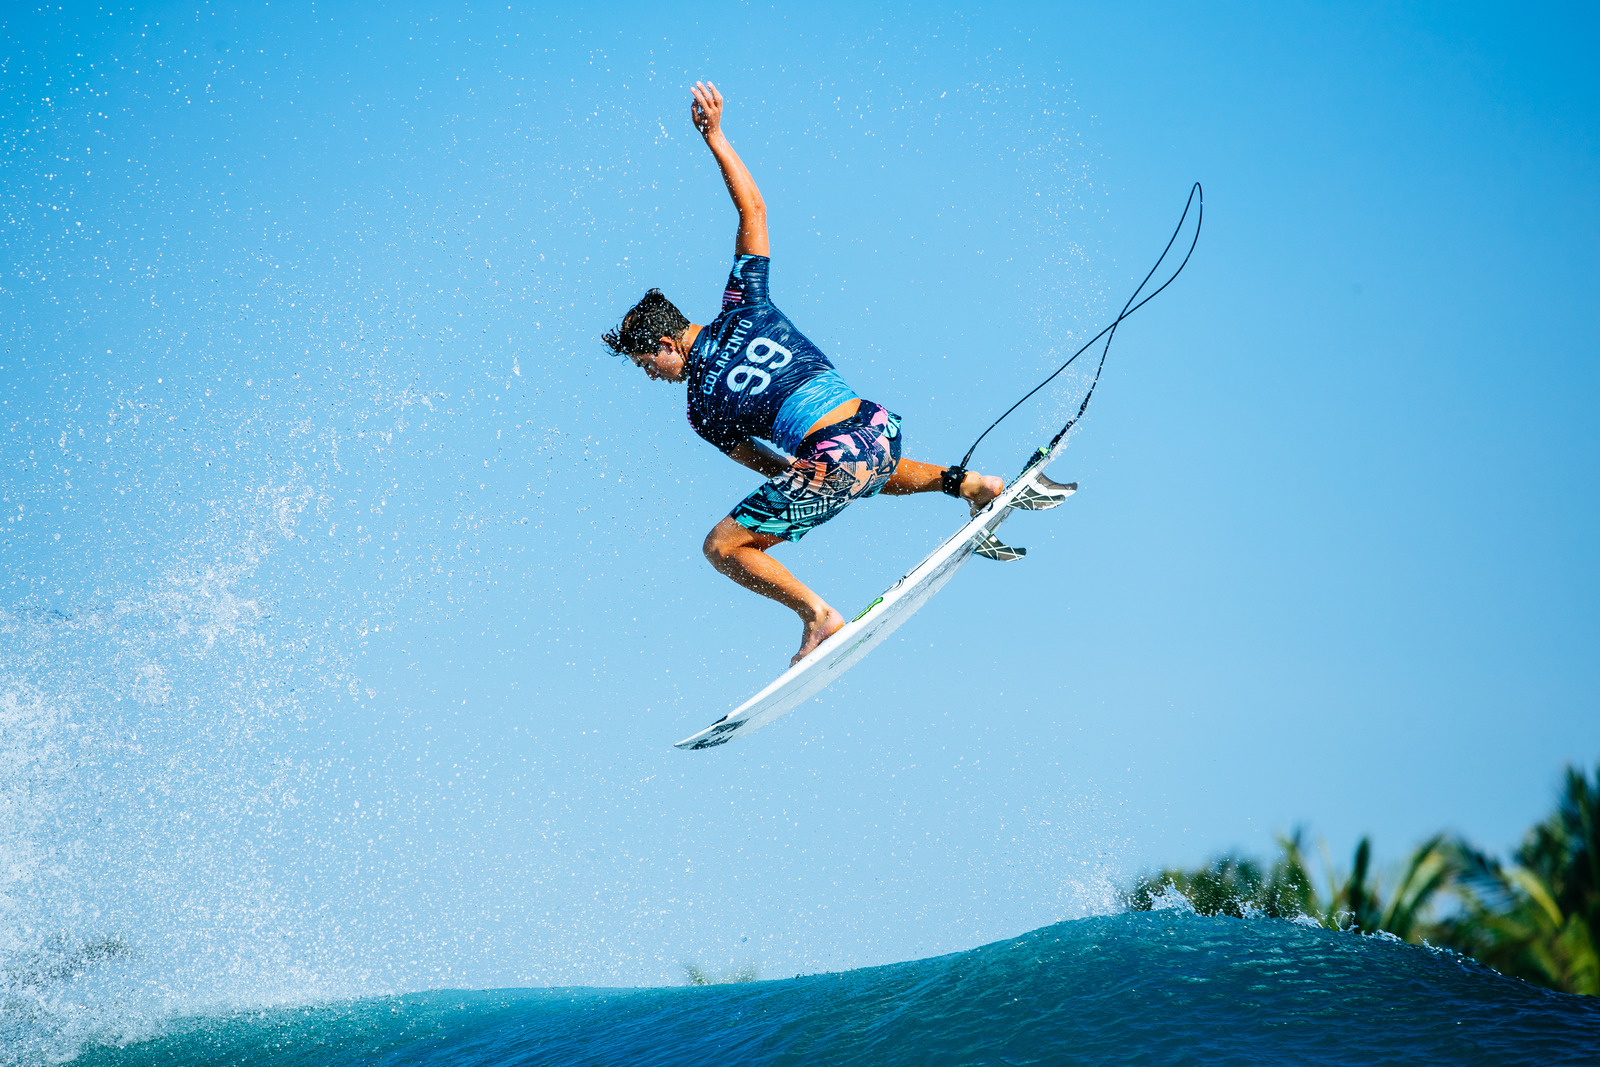 Griffin Colapinto flying in Keramas. Photo courtesy of WSL